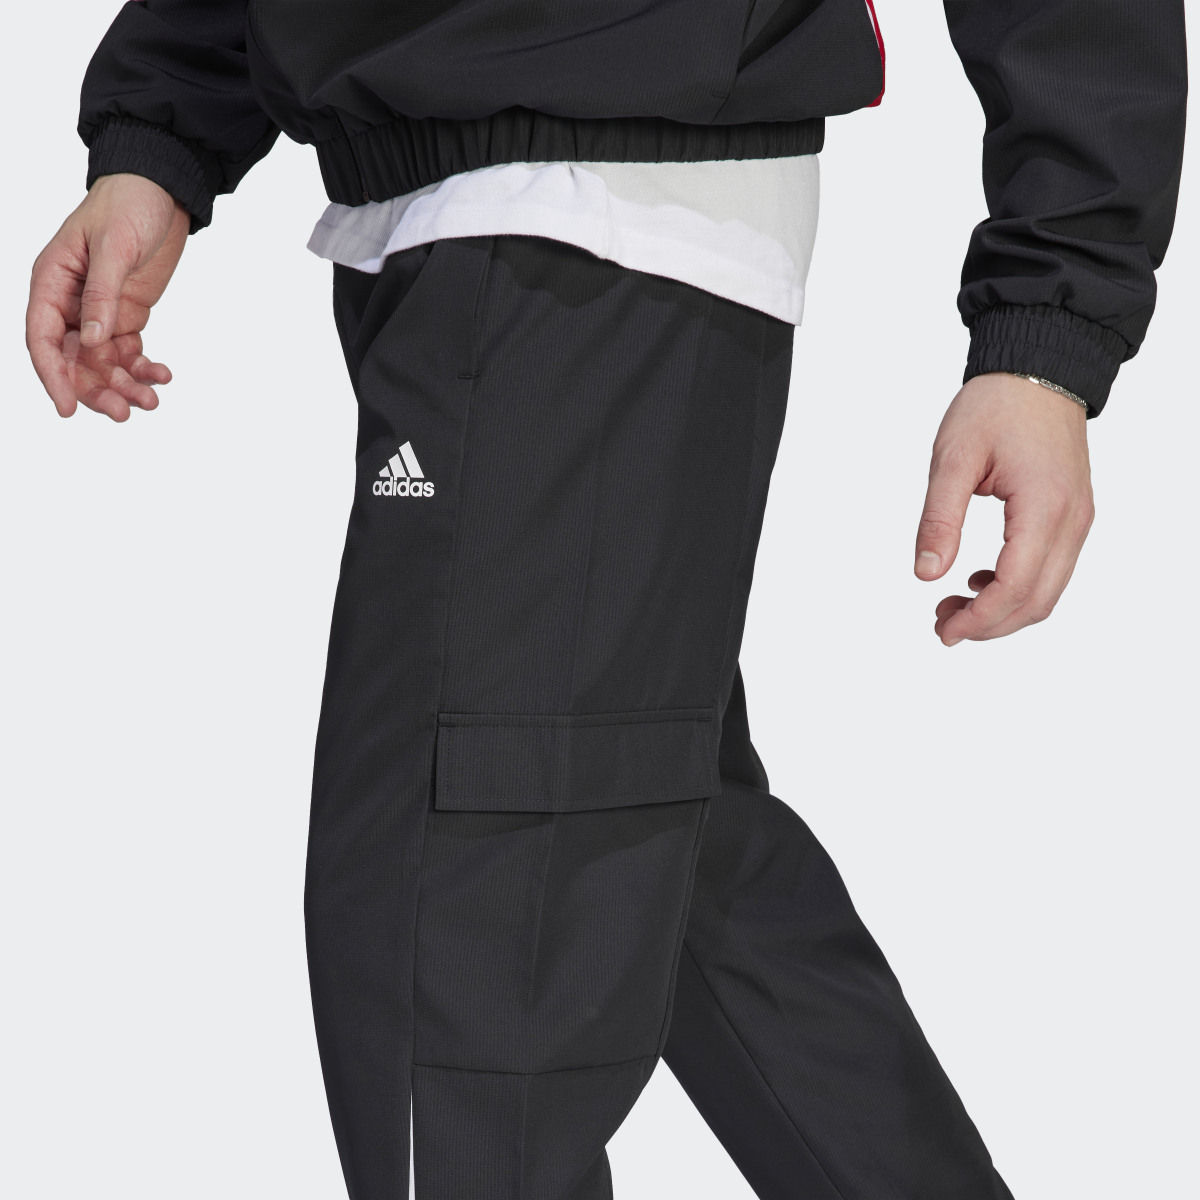 Adidas Sportswear Woven Non-Hooded Track Suit. 8